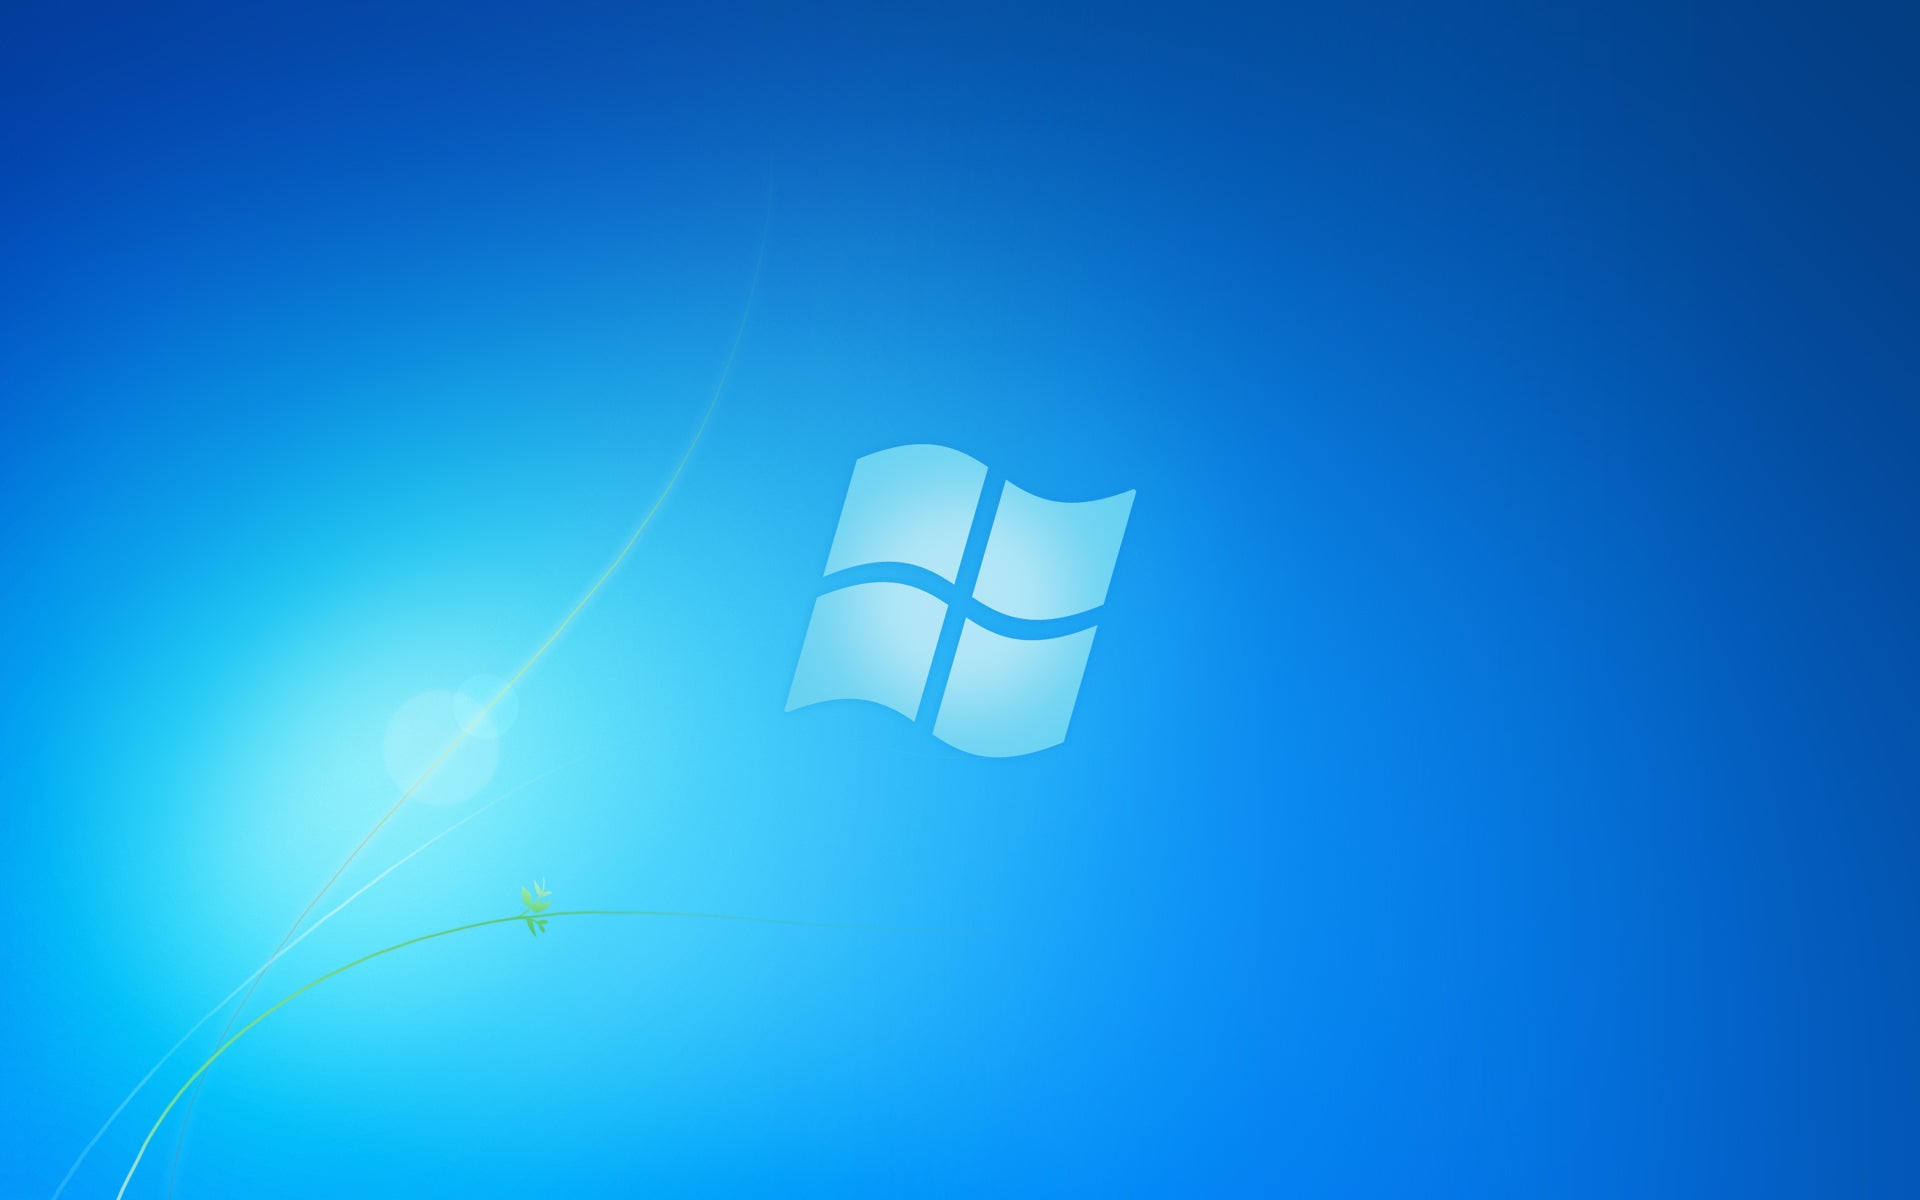 How to Change Your Wallpaper in Windows 7 Starter Edition, 5 Steps